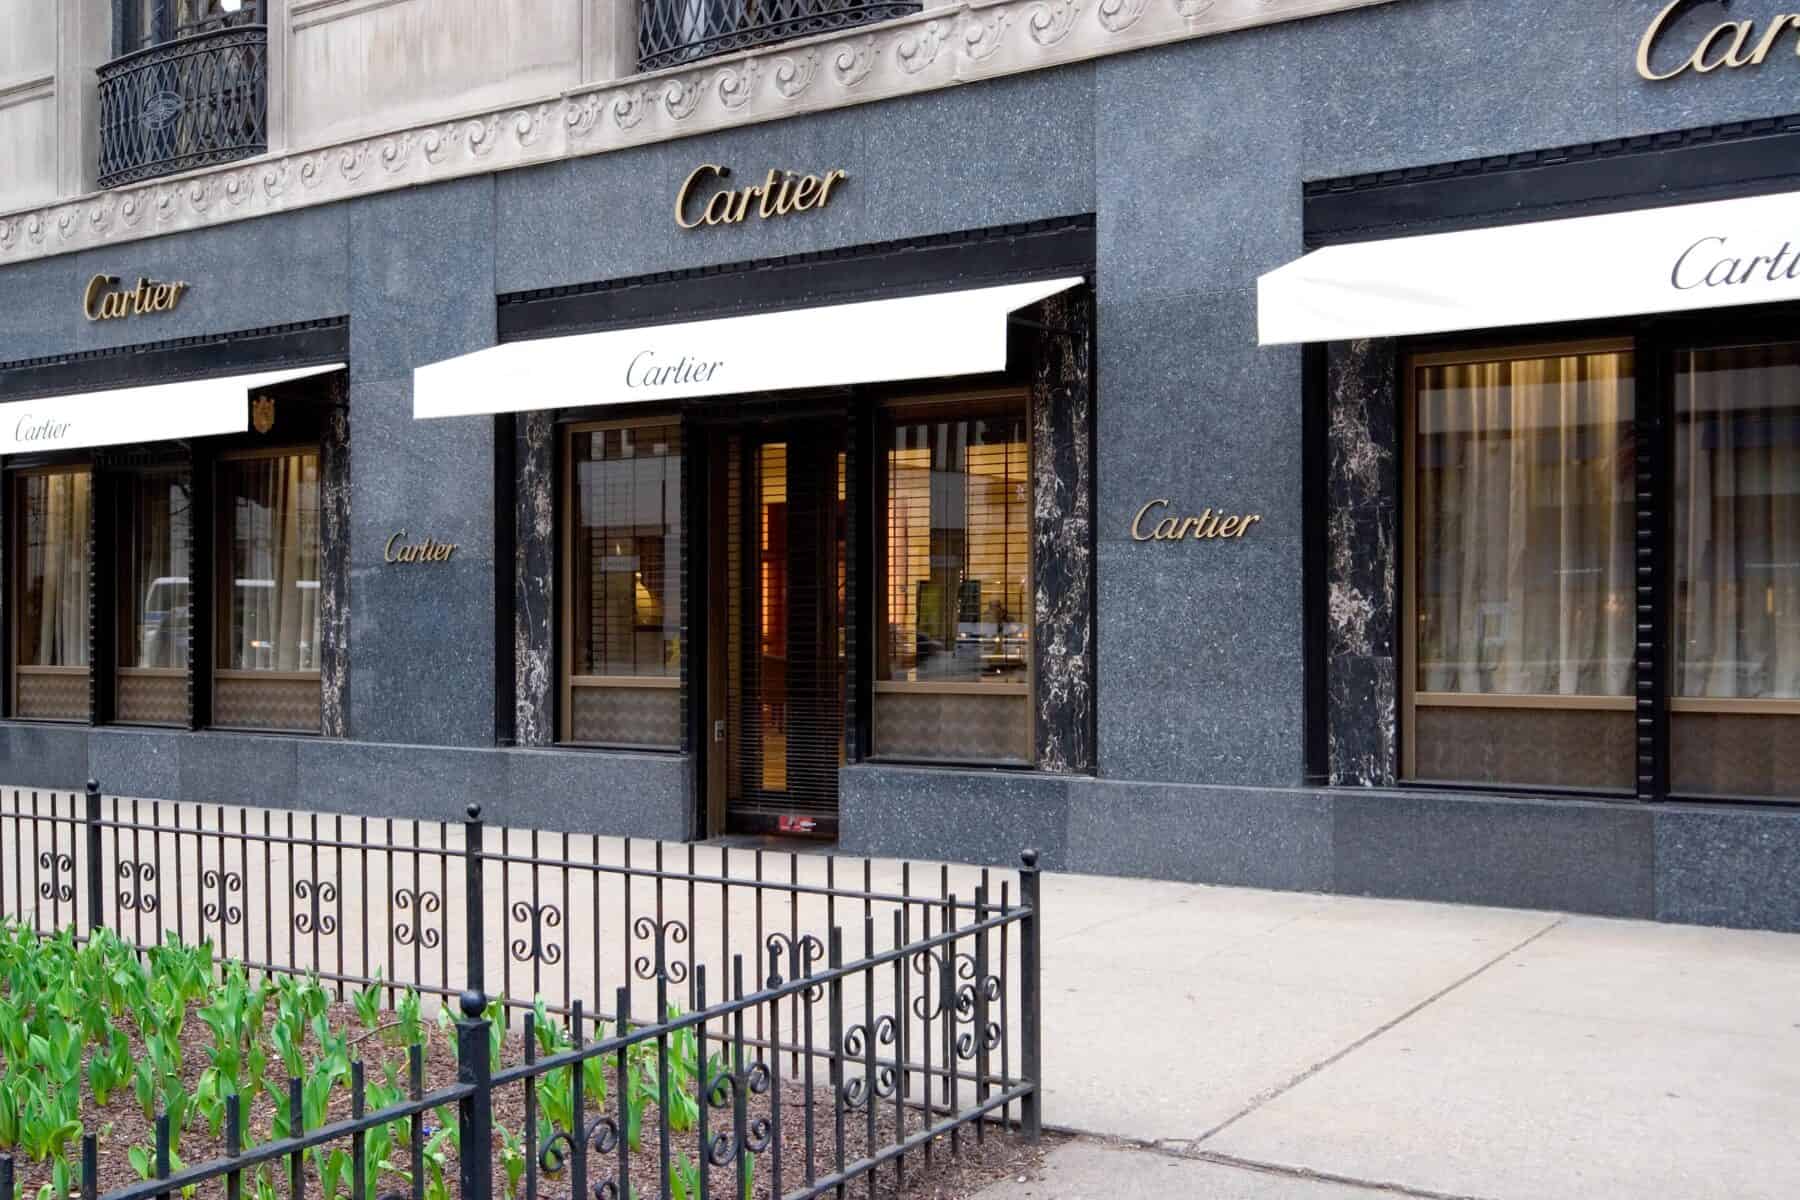 Cartier Store Remodel including Beautiful Custom Metal and Stone Details by Commercial Builder & General Contractor Structural Enterprises